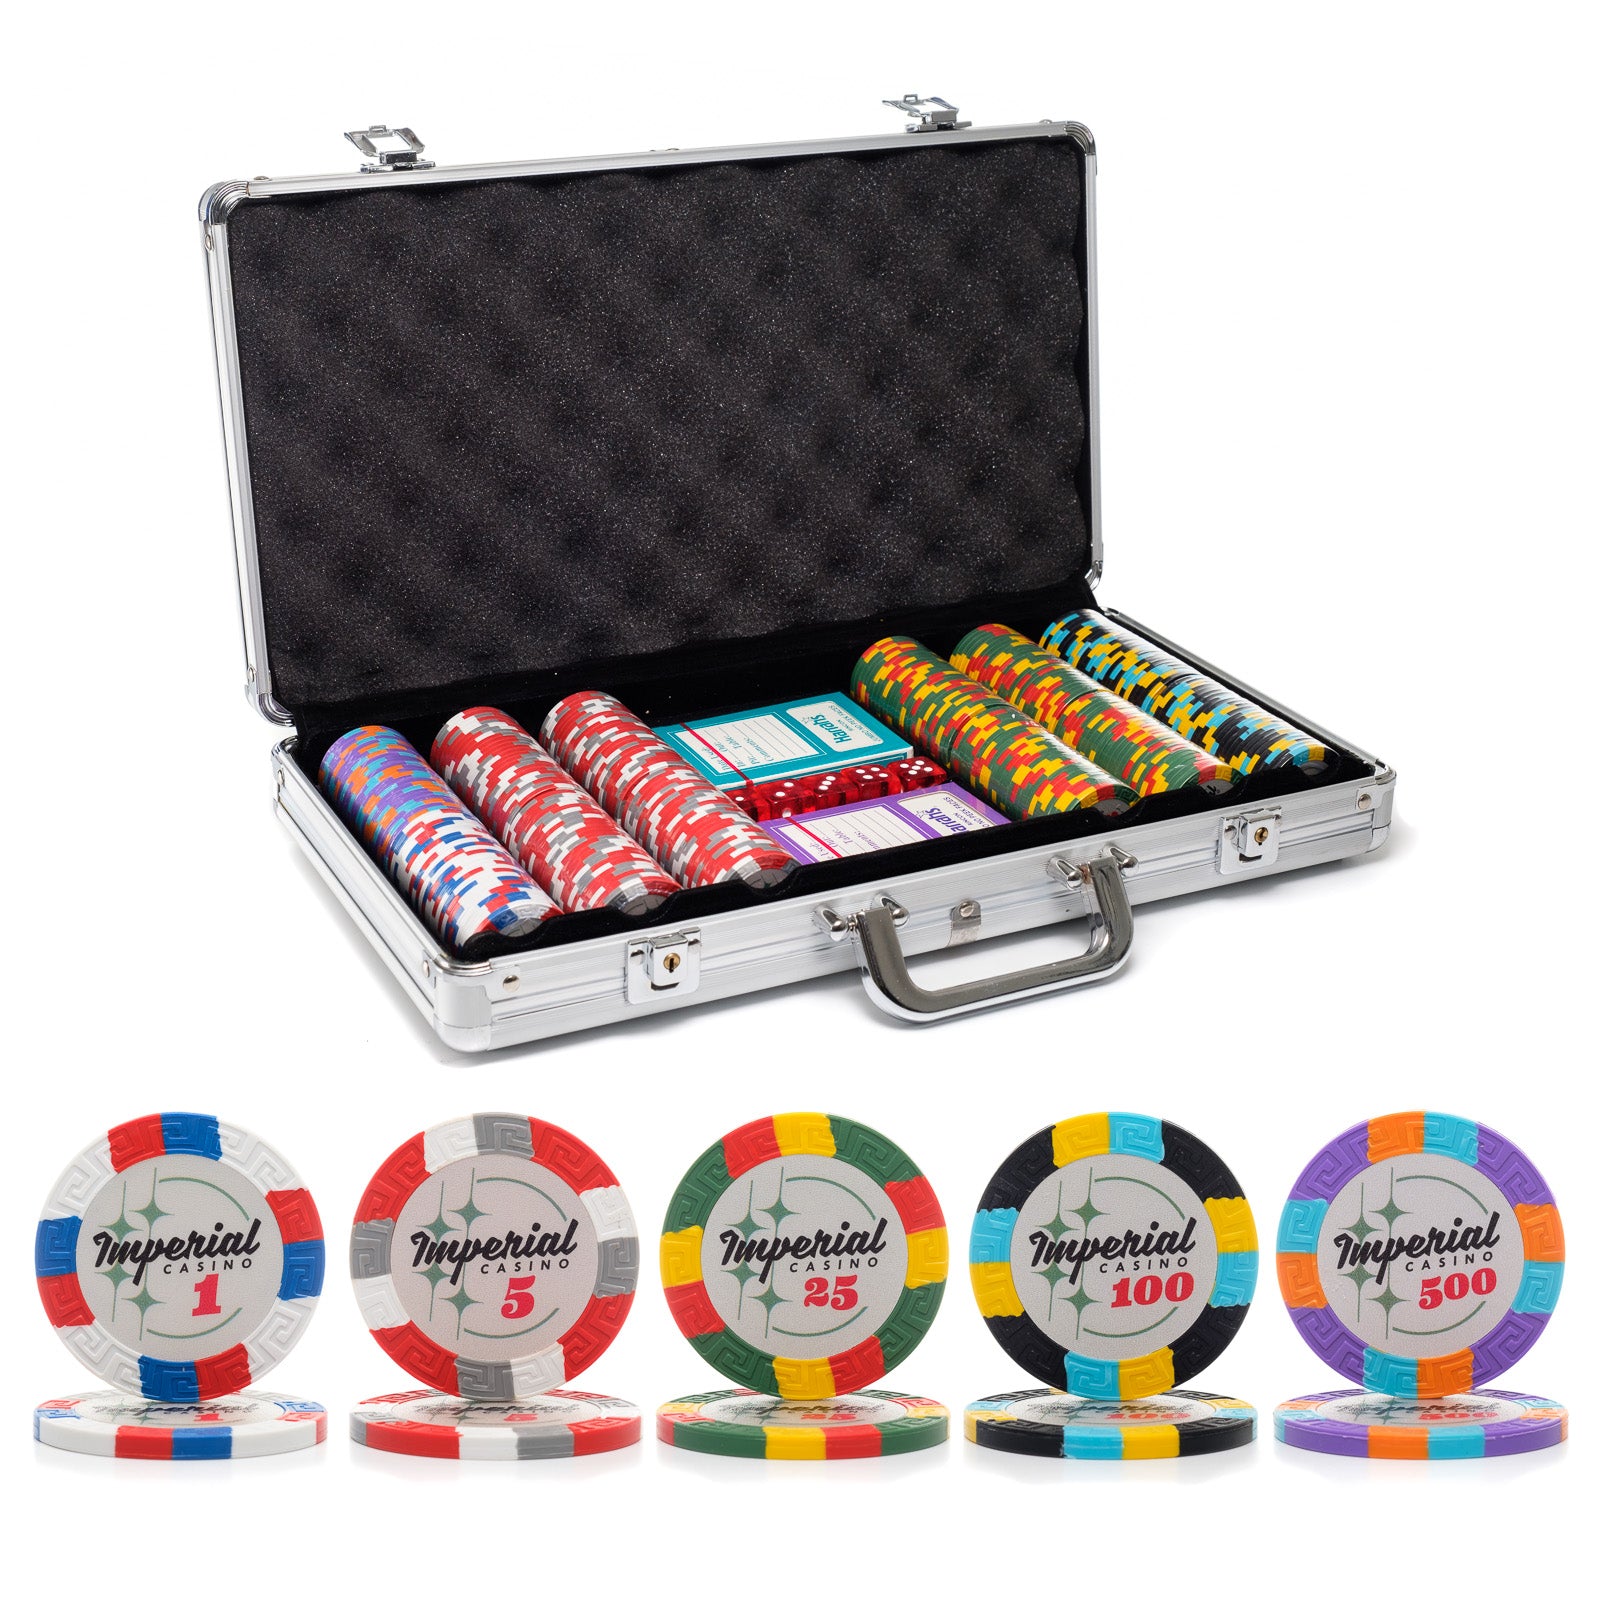 300 pc. 13g Imperial Poker Chip Set with Aluminum Case